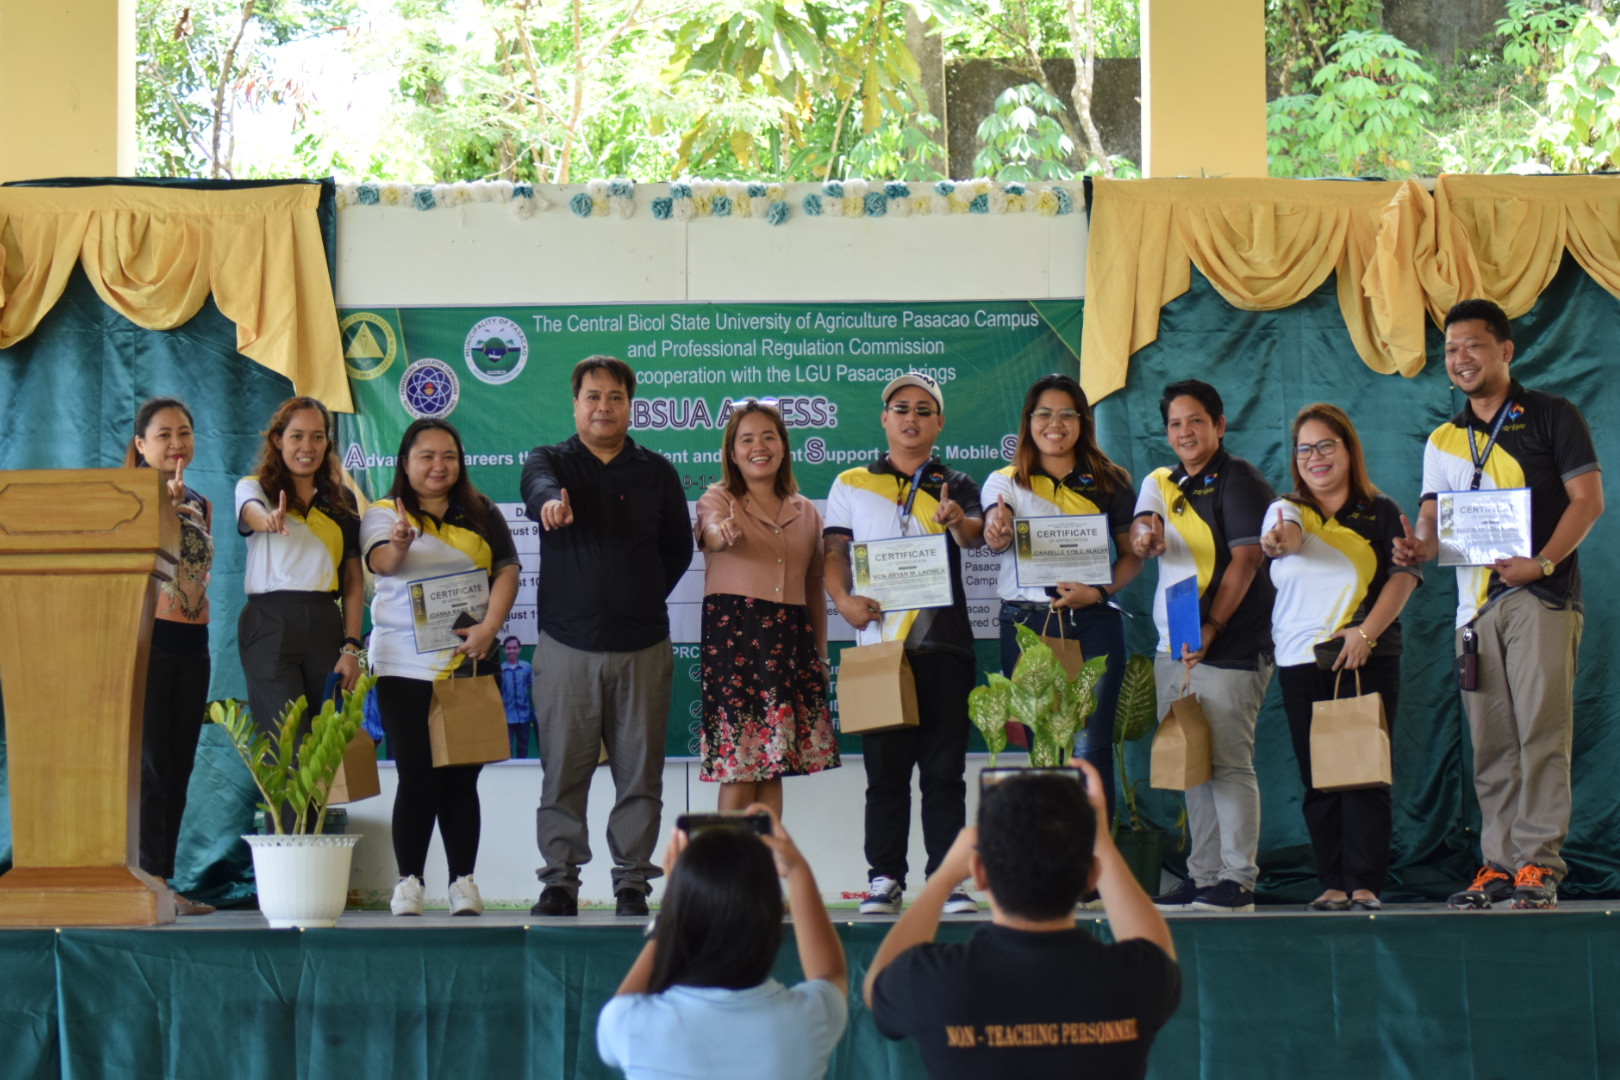 CBSUA PASACAO CAMPUS, PRC REGION V, LGU PASACAO COLLABORATE IN CBSUA ACCESS: ADVANCING CAREERS THROUGH CONVENIENT AND EFFICIENT SUPPORT OF PRC MOBILE SERVICE